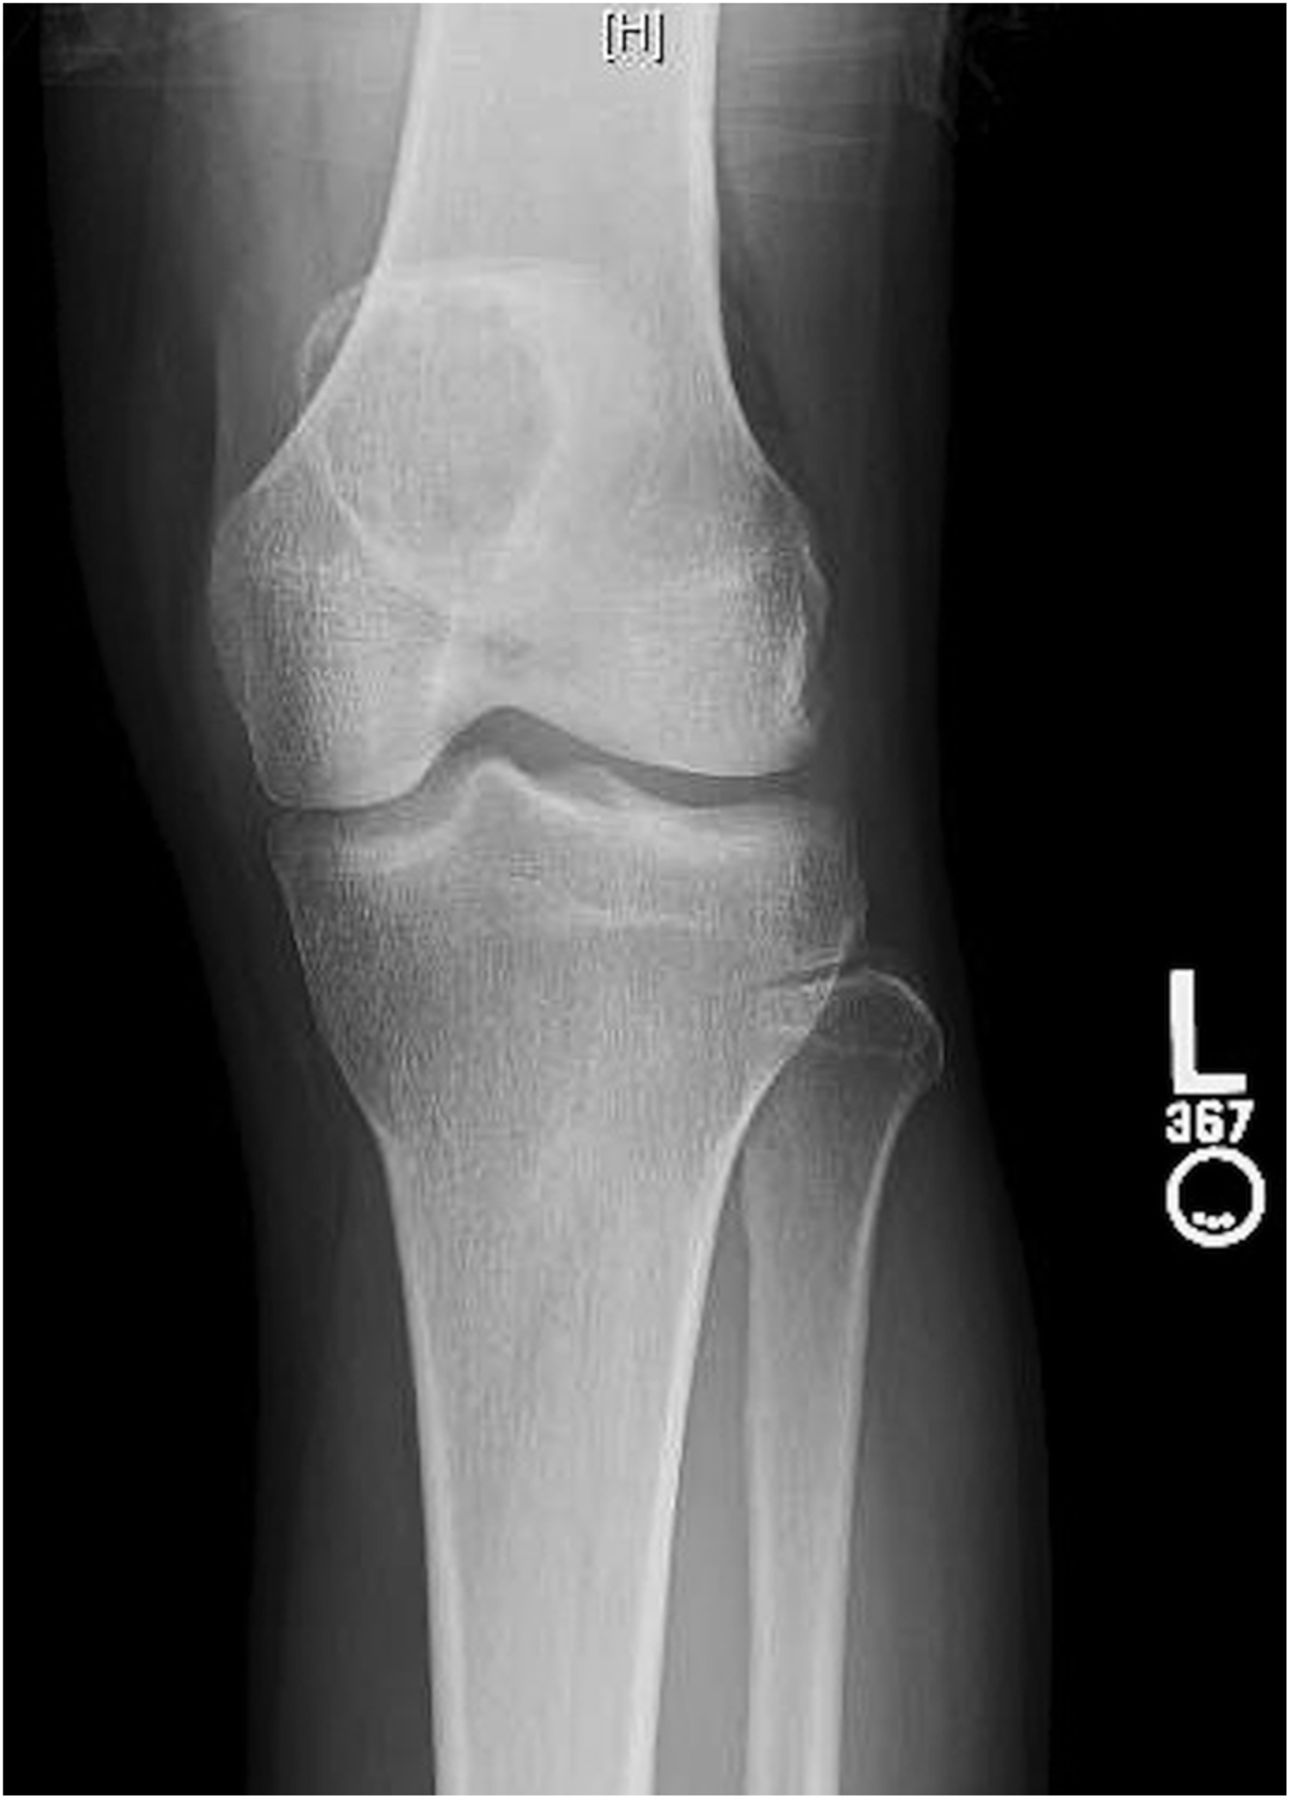 A 33-Year-Old Man with Left Knee Pain - JBJS Image Quiz